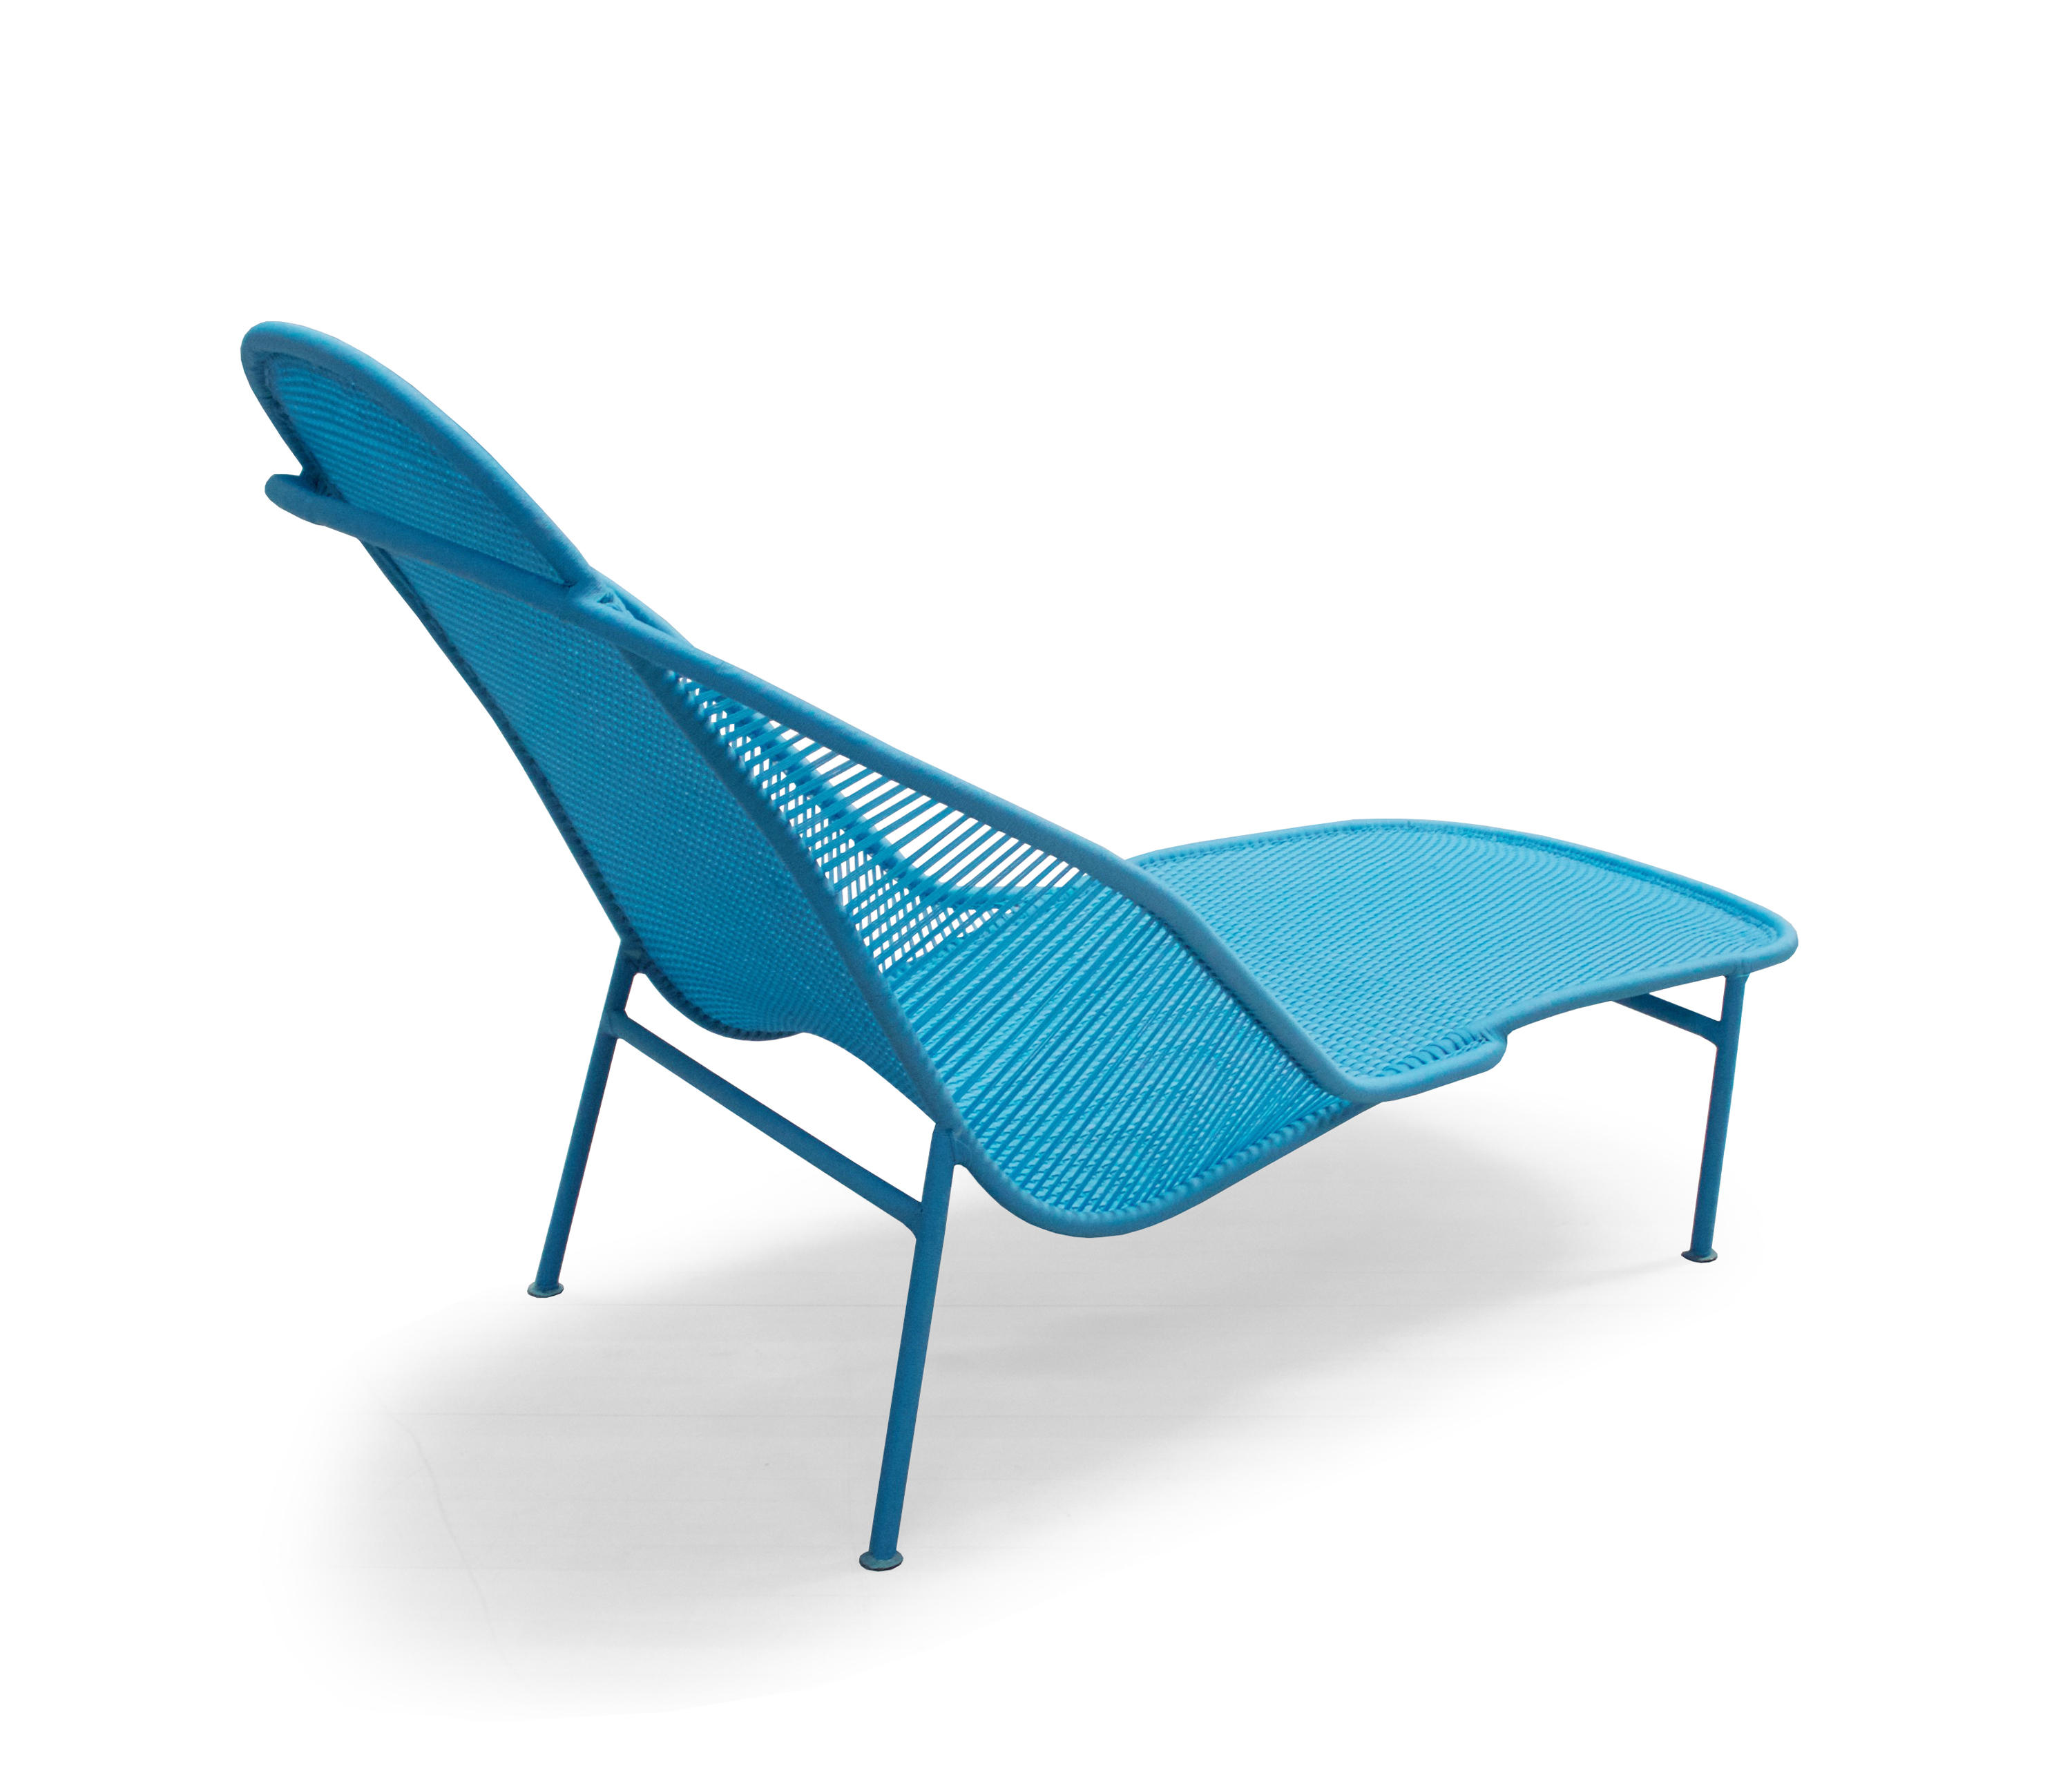 Imba Chaise Longues From Moroso Architonic